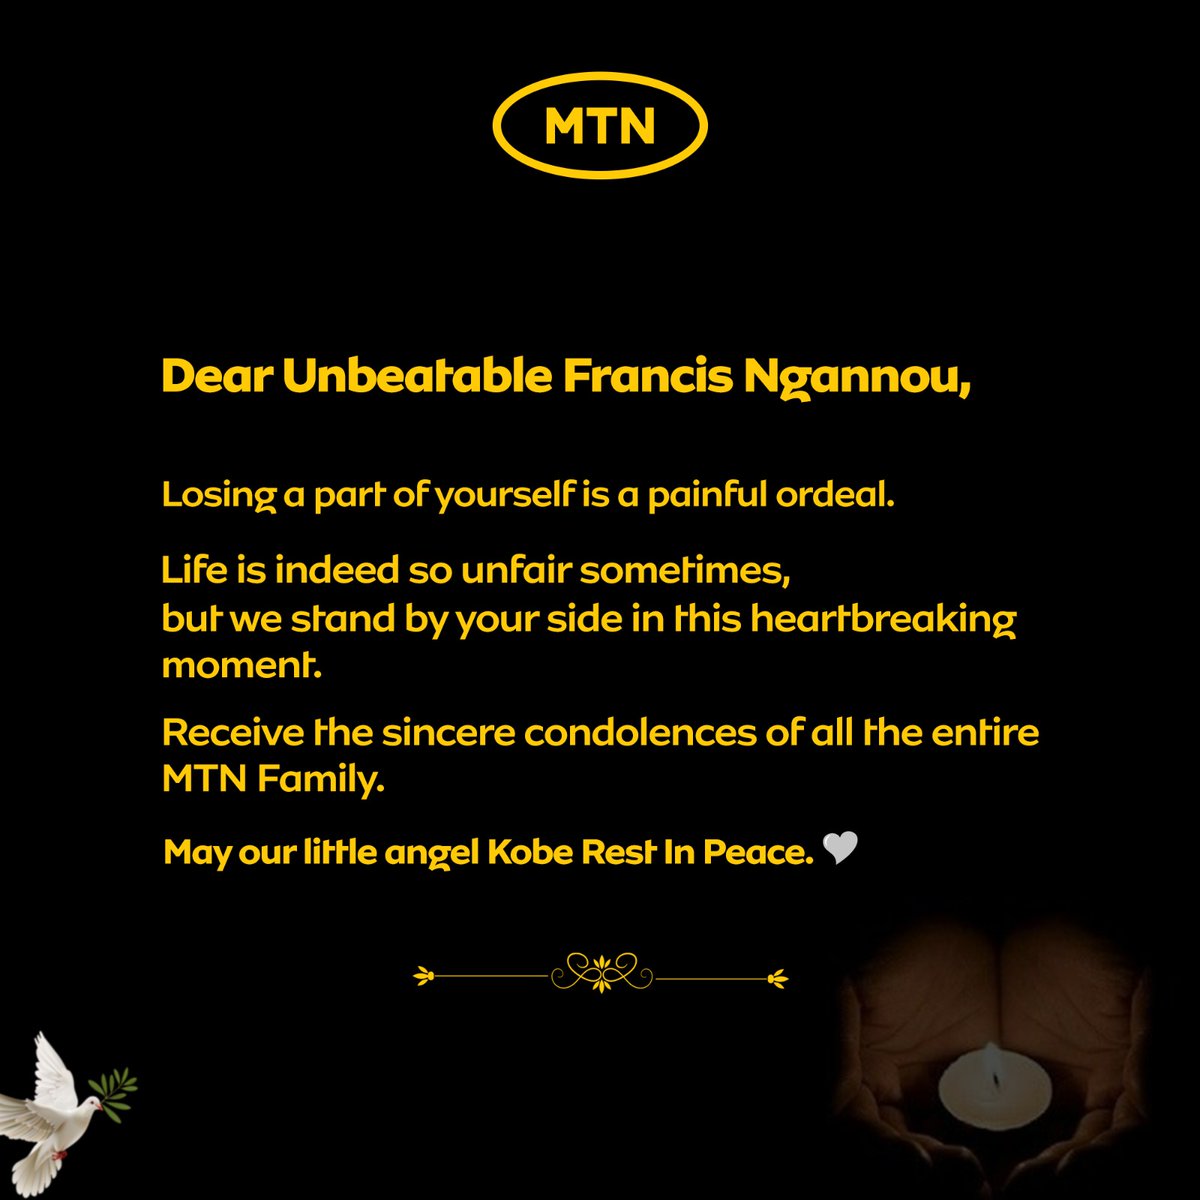 Sending our deepest condolences to Francis N'Gannou and his family during this heartbreaking moment. 🖤 You are part of our family, and you are not alone.